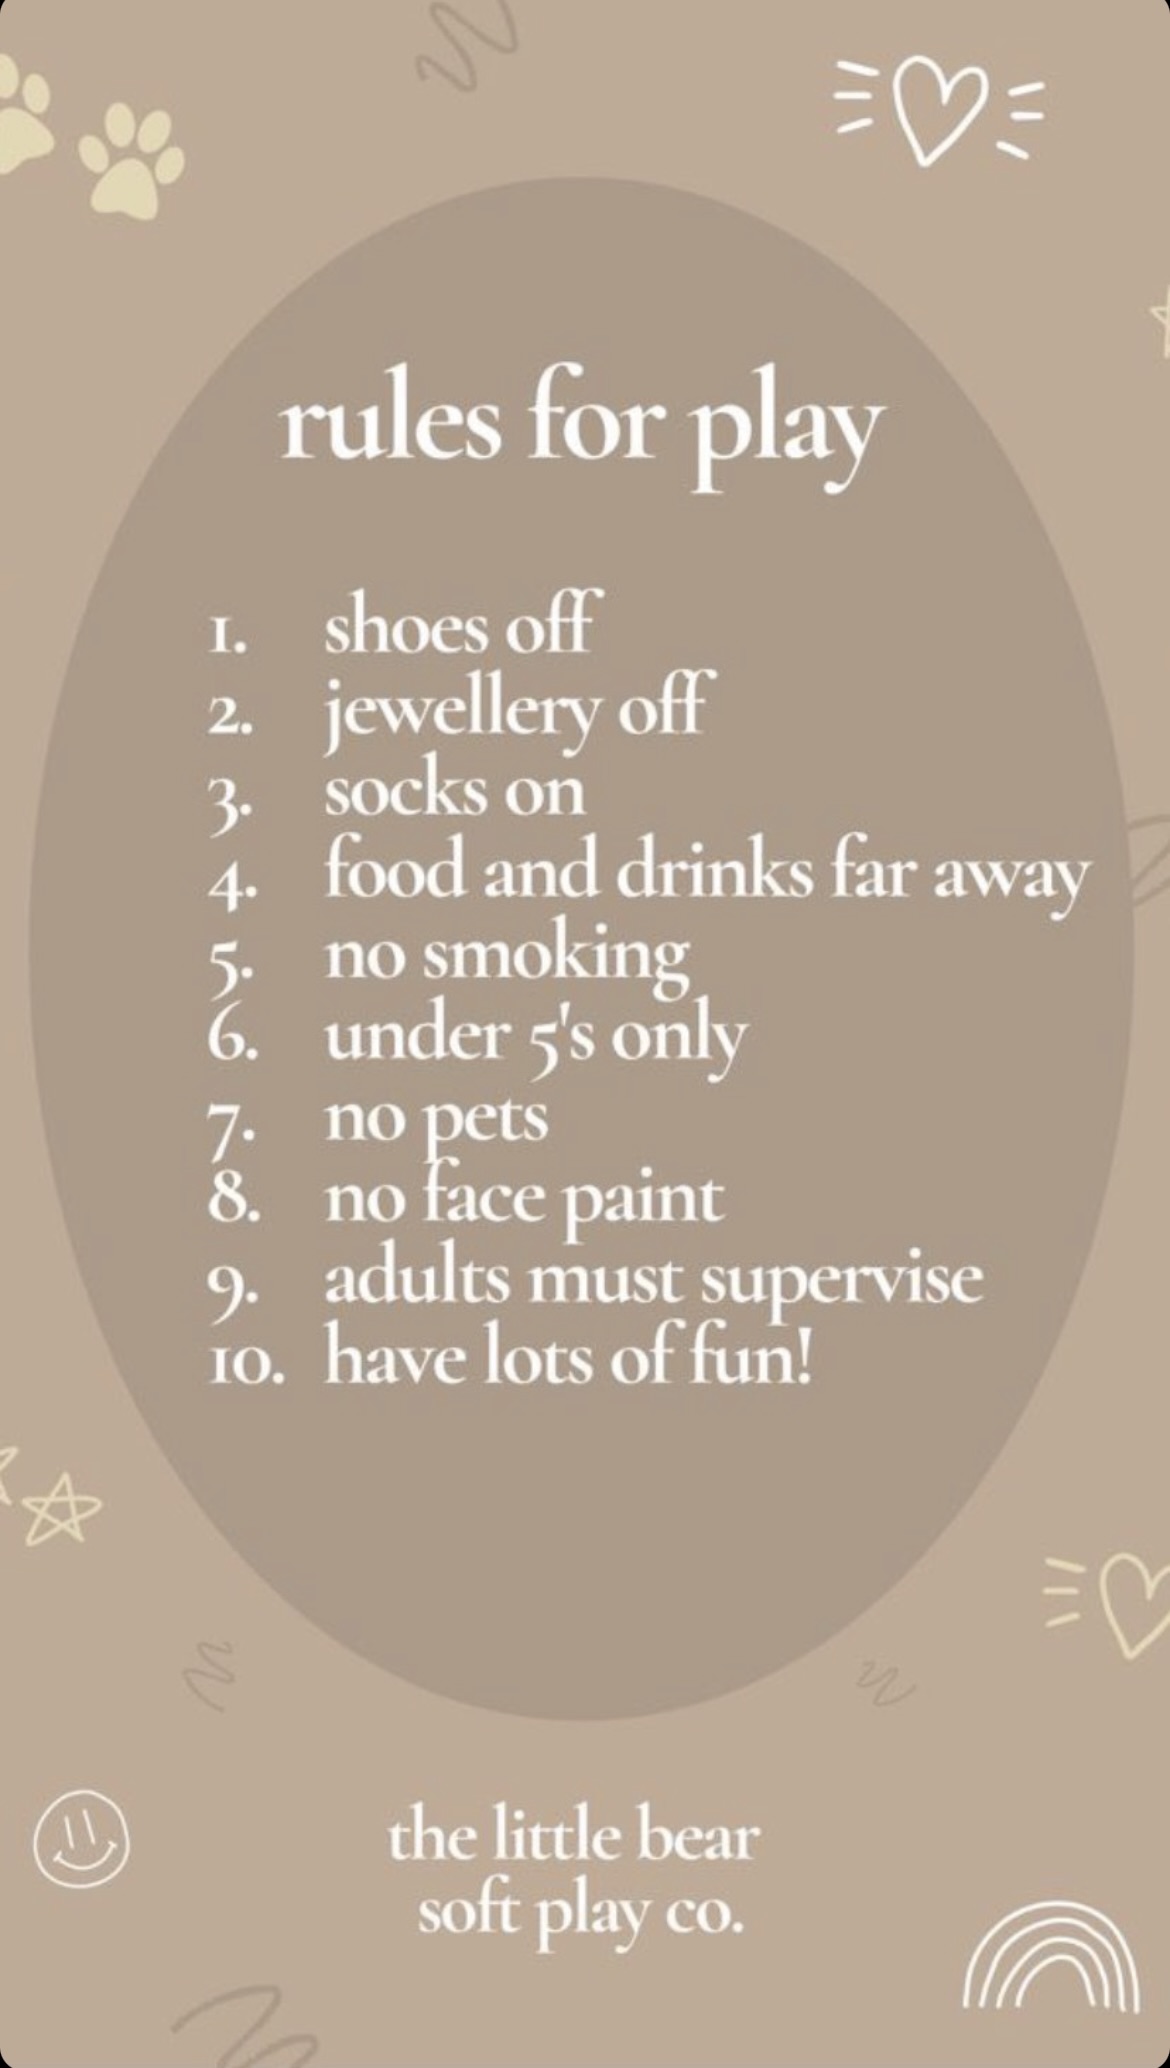 rules of soft play